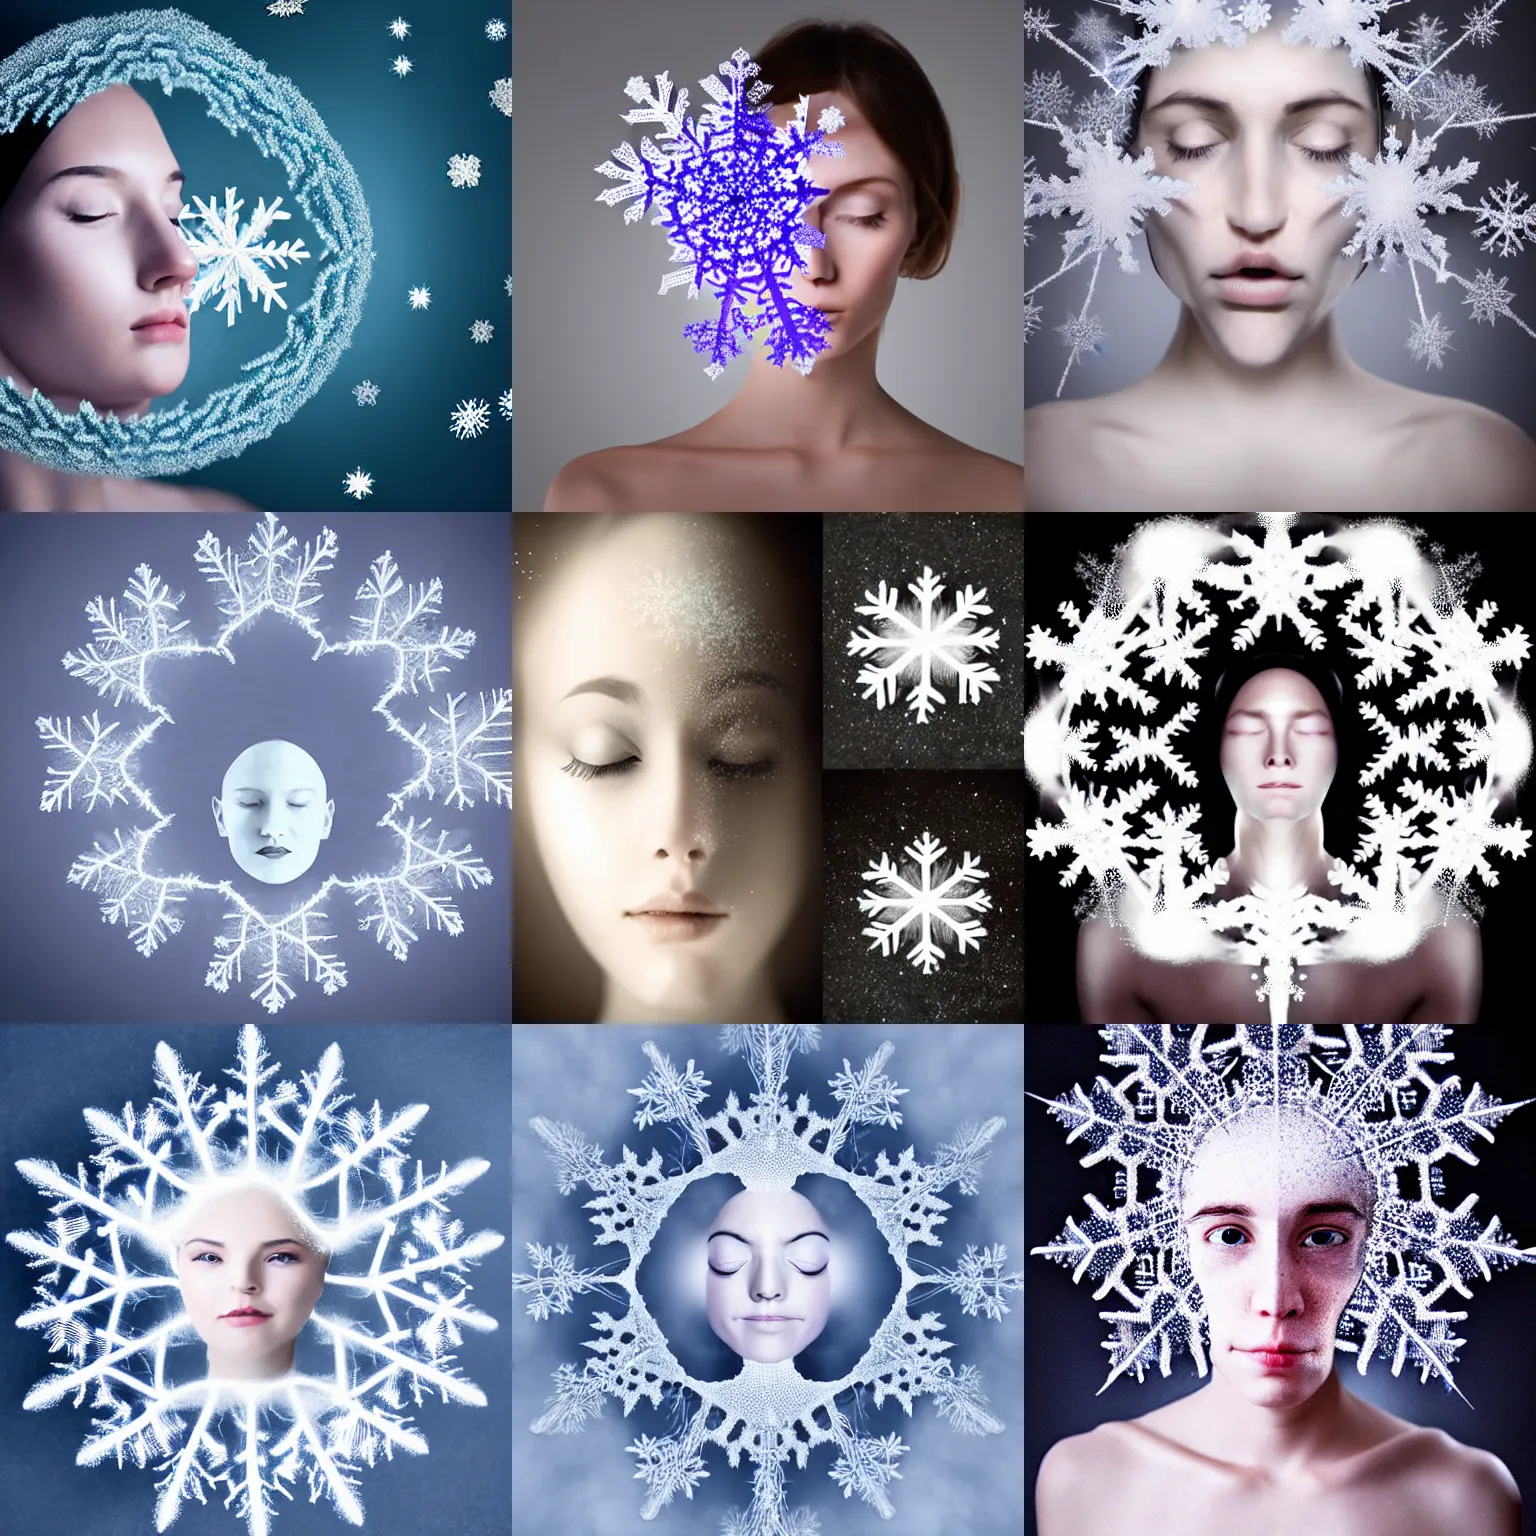 Prompt: surreal photography silk snowflake with ethereal human face